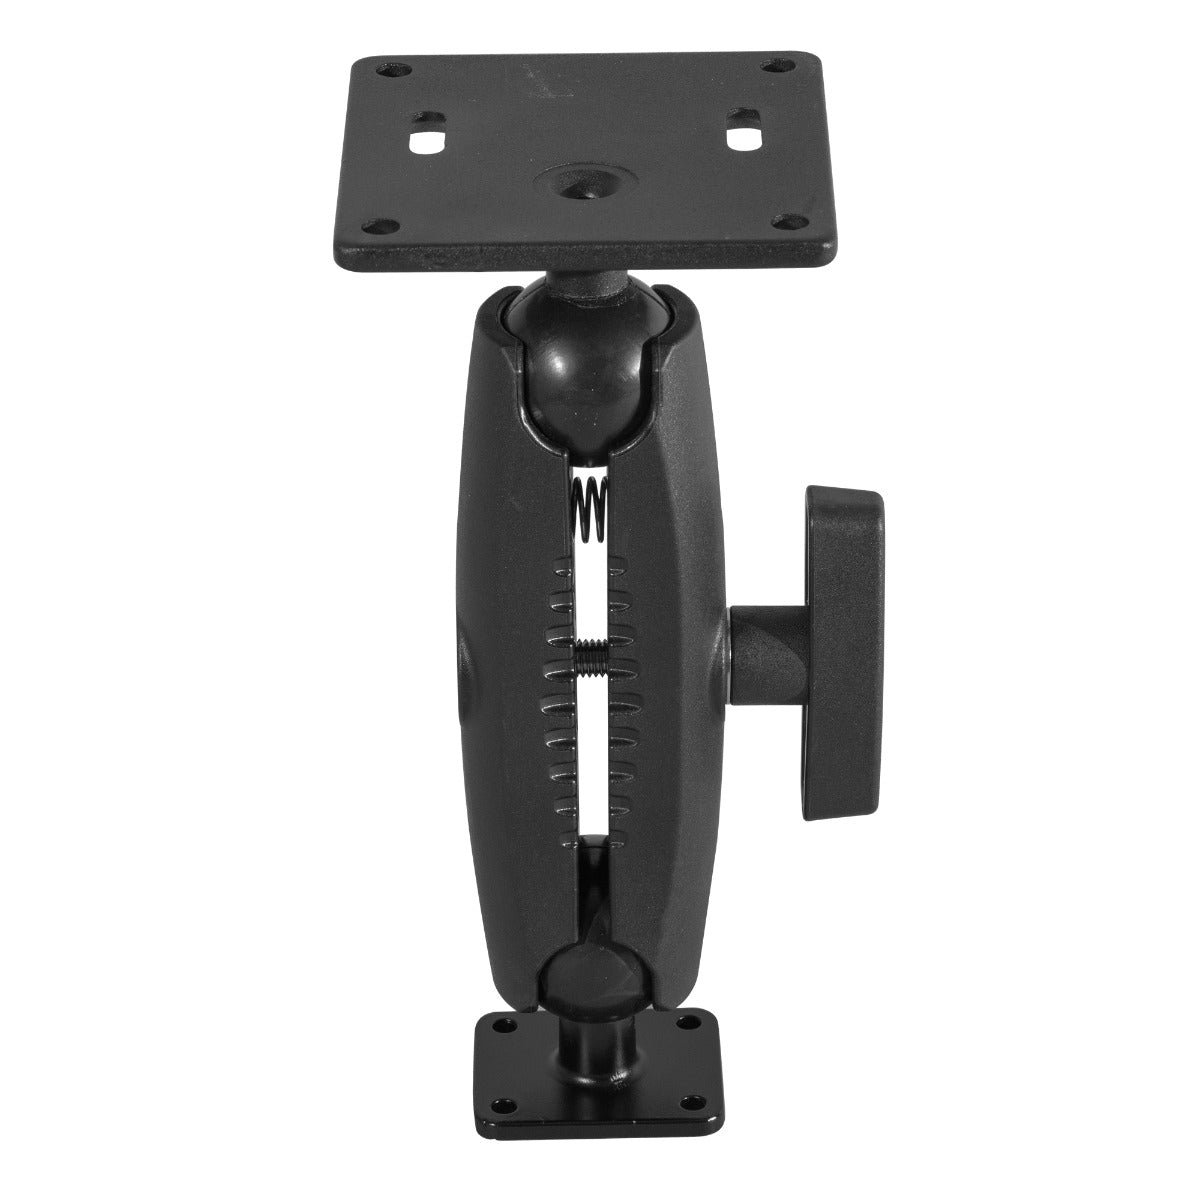 iBOLT™ 38mm / 1.5 inch Metal AMPS to VESA 75 x 75 Mount for Monitors, displays, or tv’s